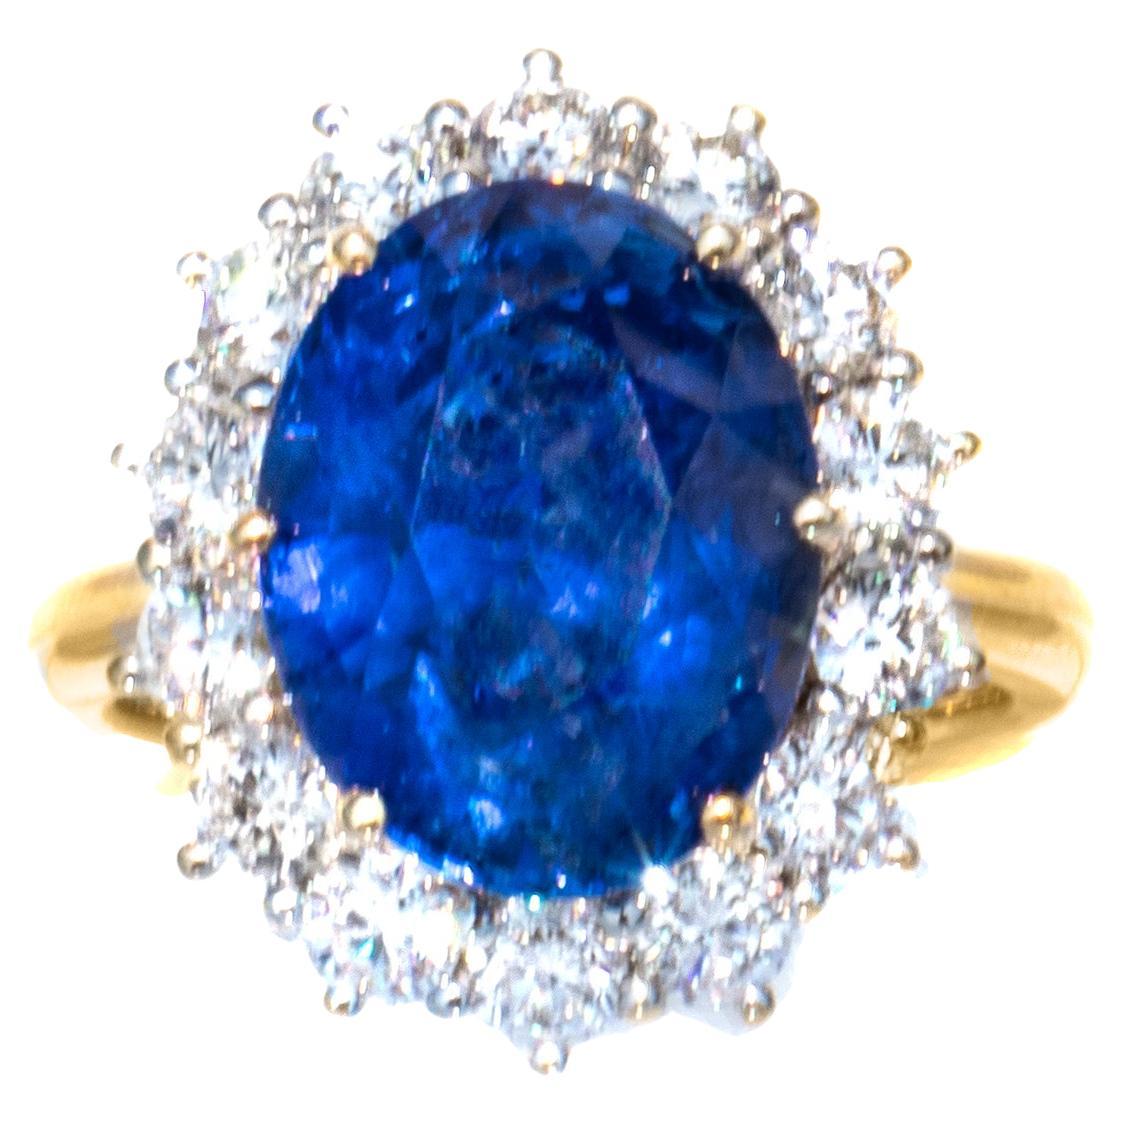 This is an absolutely gorgeous and unusual Kashmir blue color sapphire.  It's the most sought-after blue sapphire color. It's very rare, clear and sparkling sapphire. It's over 7 carats and perfect for a left or right-hand ring. This is the classic